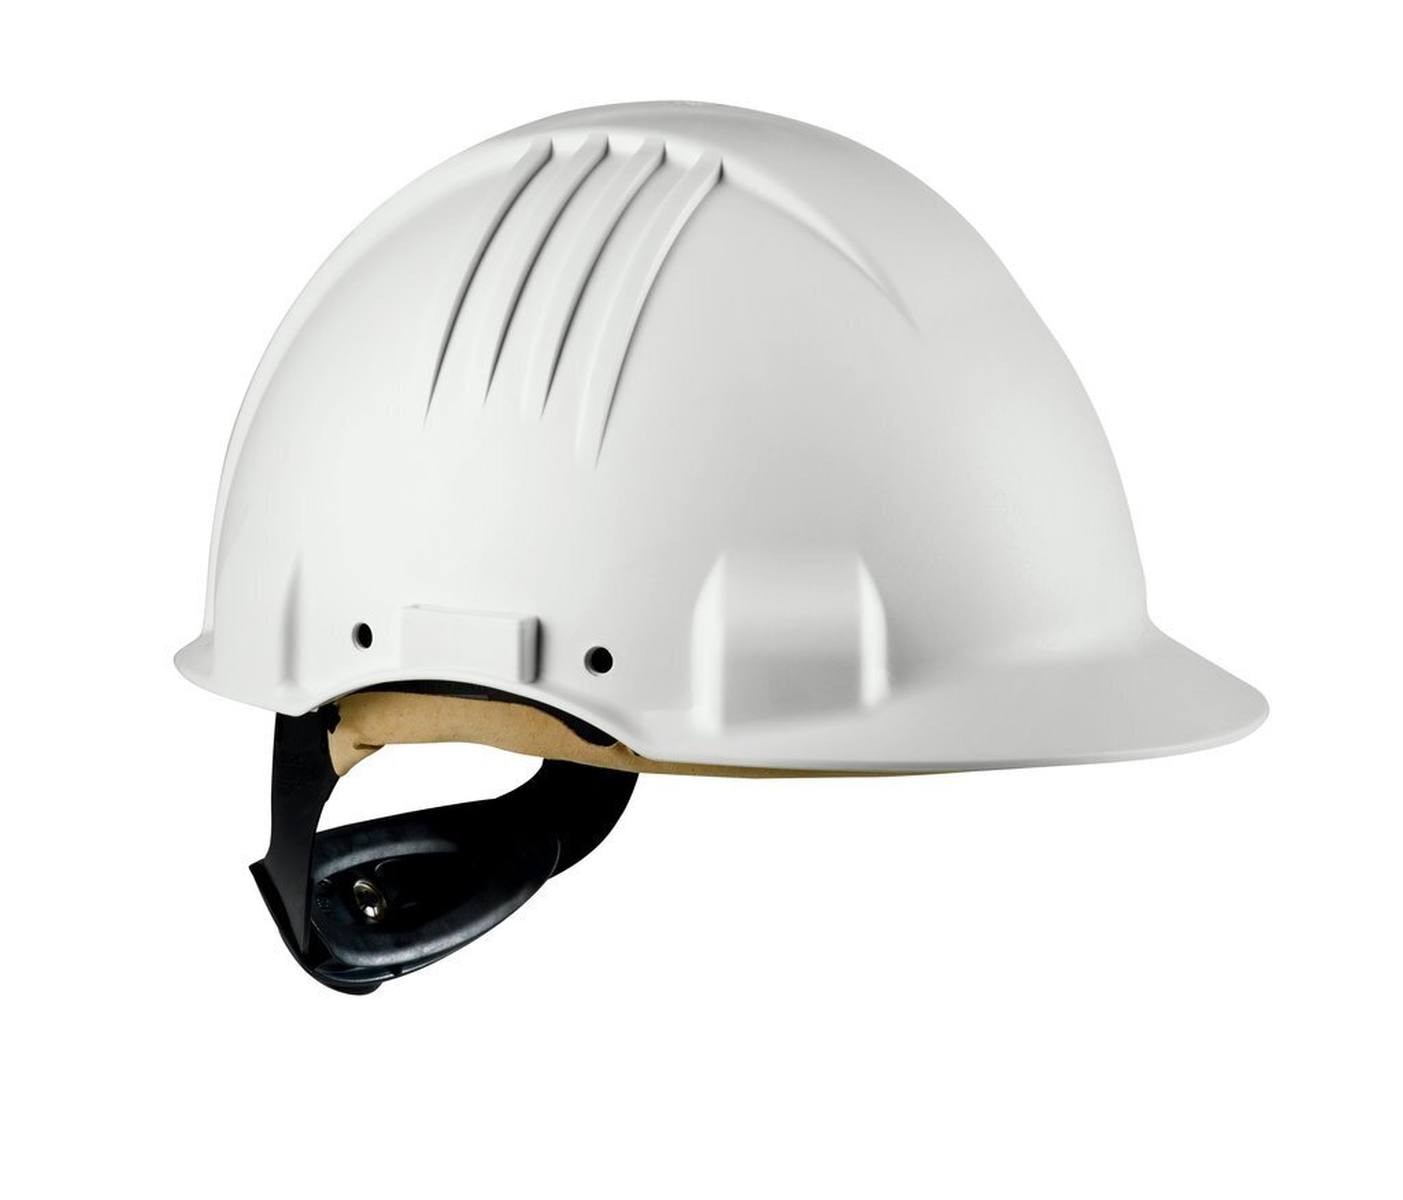 3M High-temperature safety helmet, ratchet fastening, non-ventilated, dielectric 1000 V, leather sweatband, white, G3501M-VI